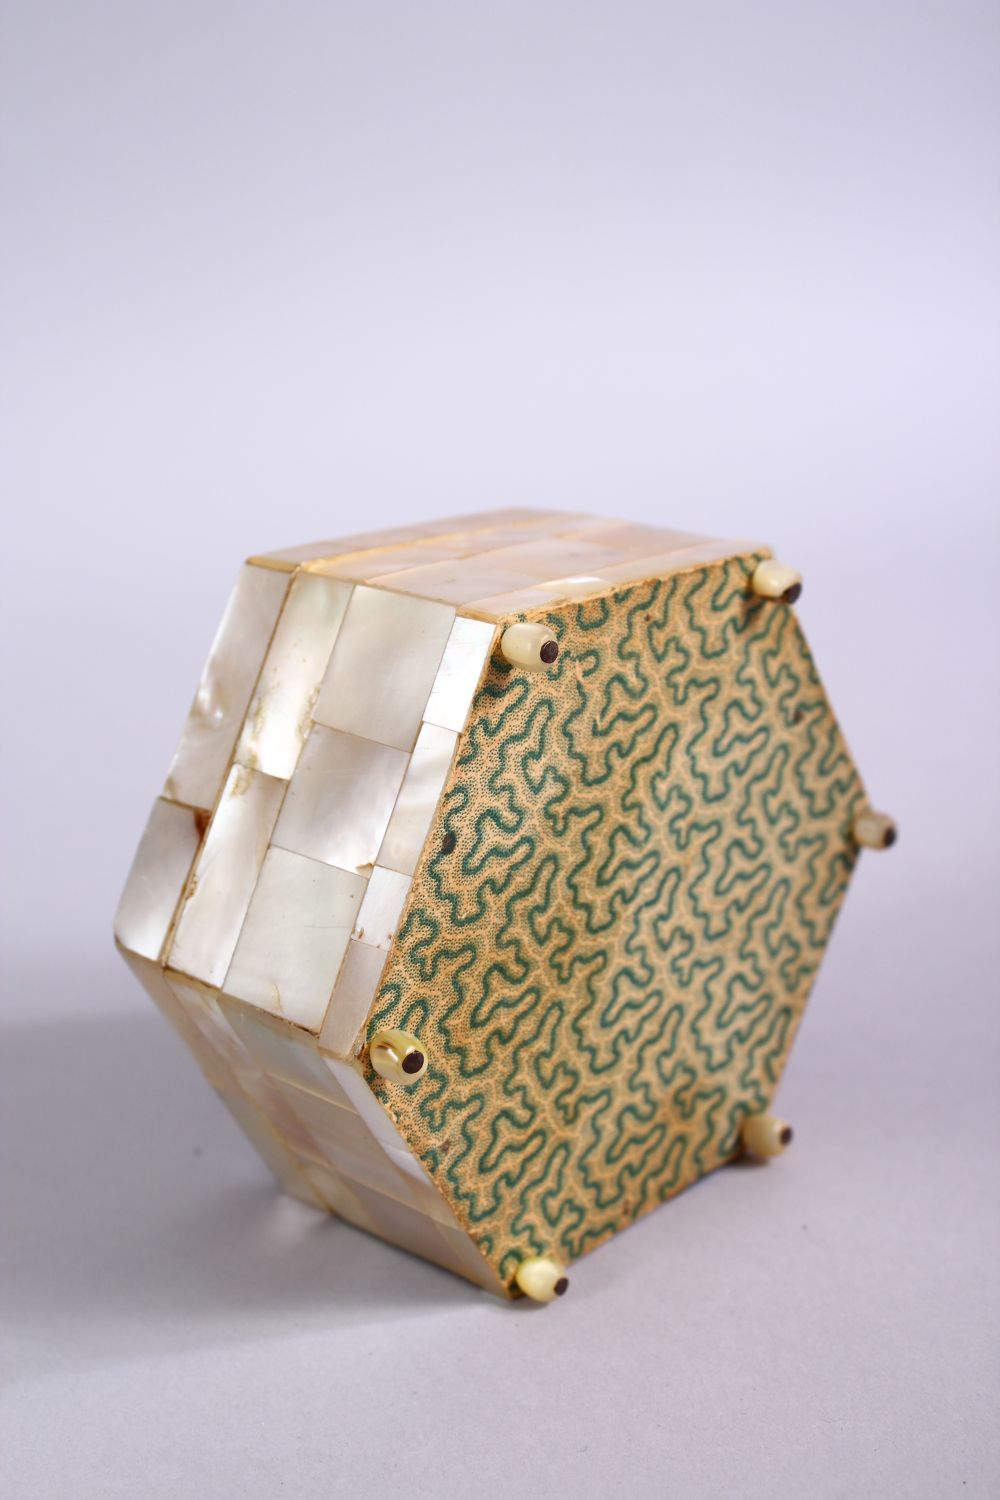 A 19TH CENTURY INDIAN MOTHER OF PEARL LIDDED BOX, the top with carved foliate design, 8cm wide. - Image 4 of 4